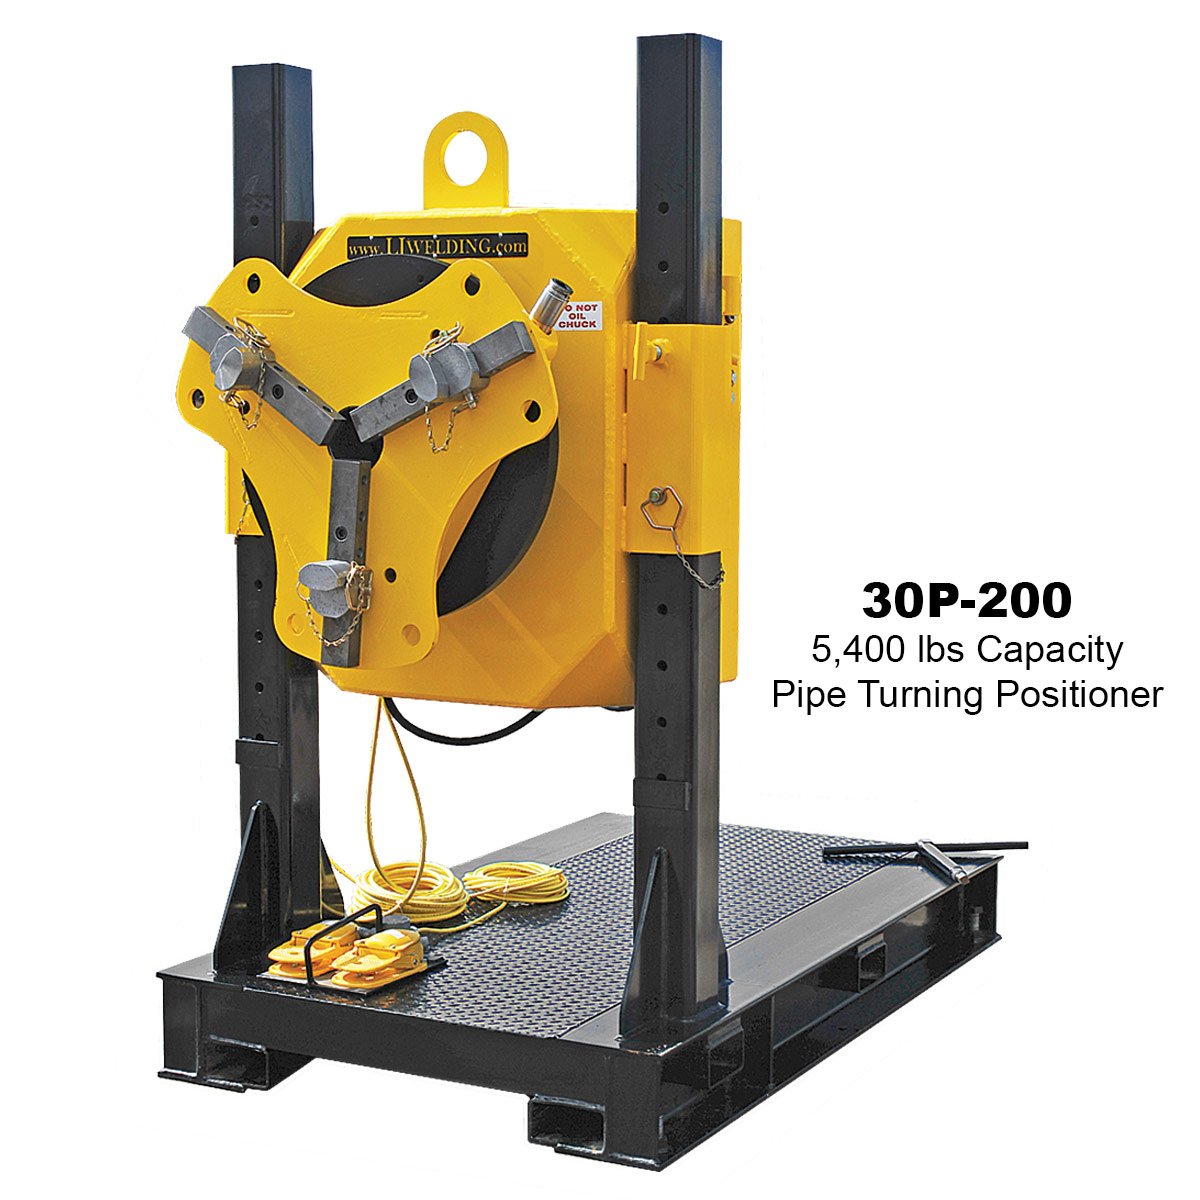 01-5400lb-Pipe-Turning-Positioner